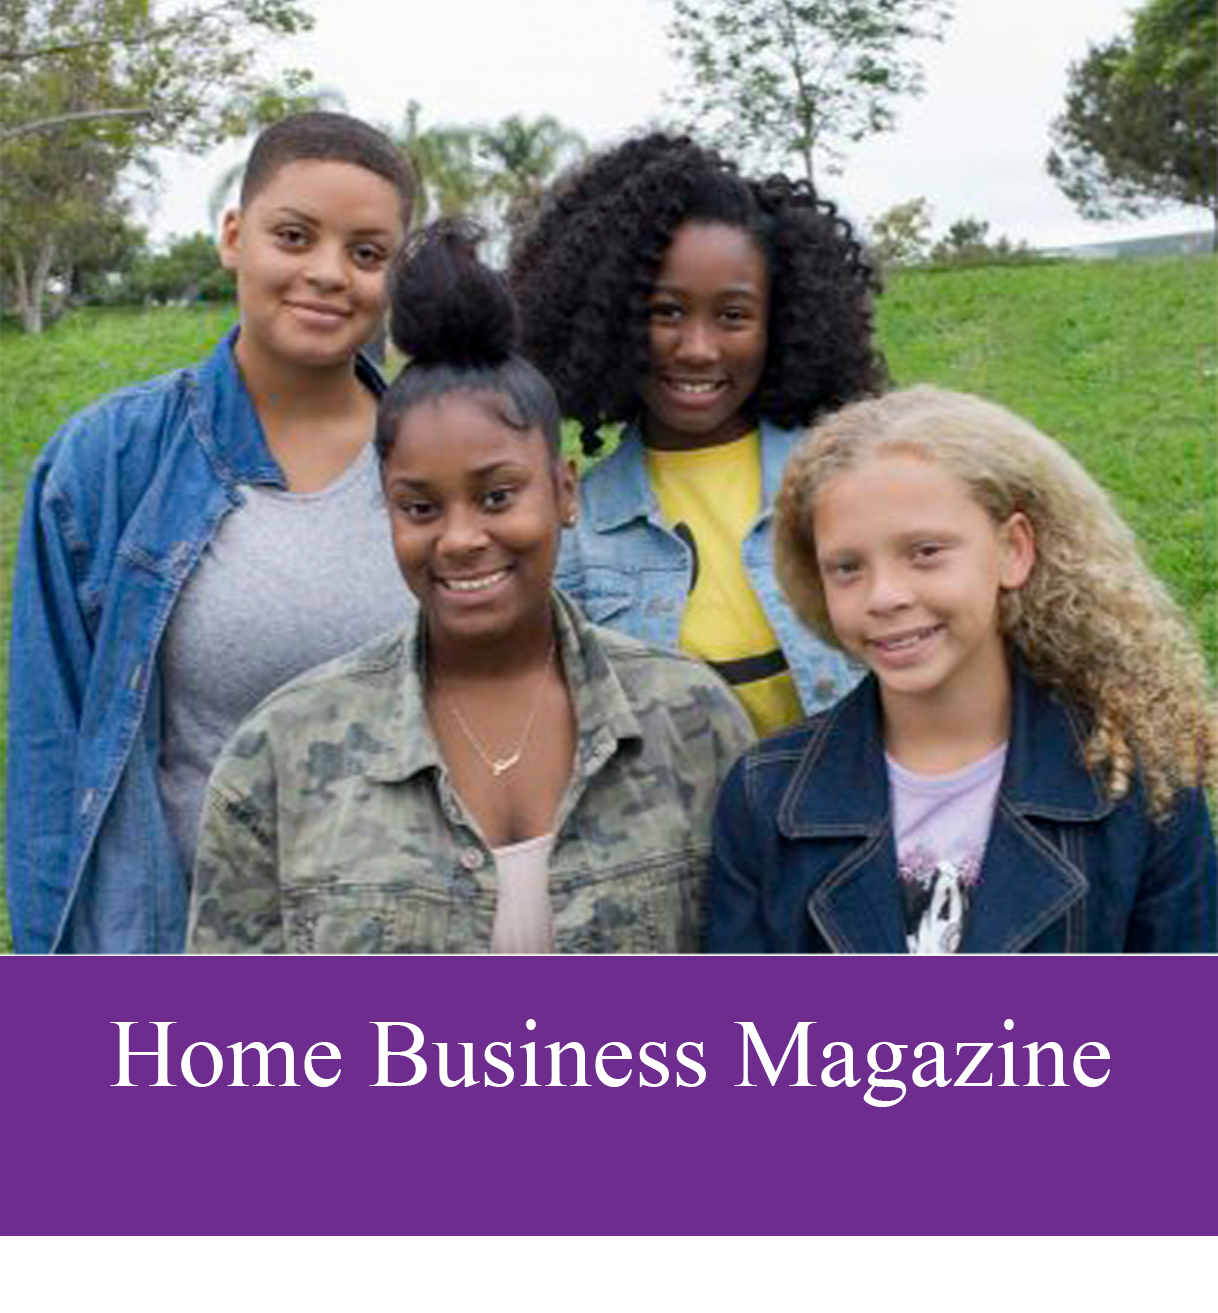 Home Business Magazine: Shaun Robinson Announces Formation of S.H.A.U.N. Foundation for Girls